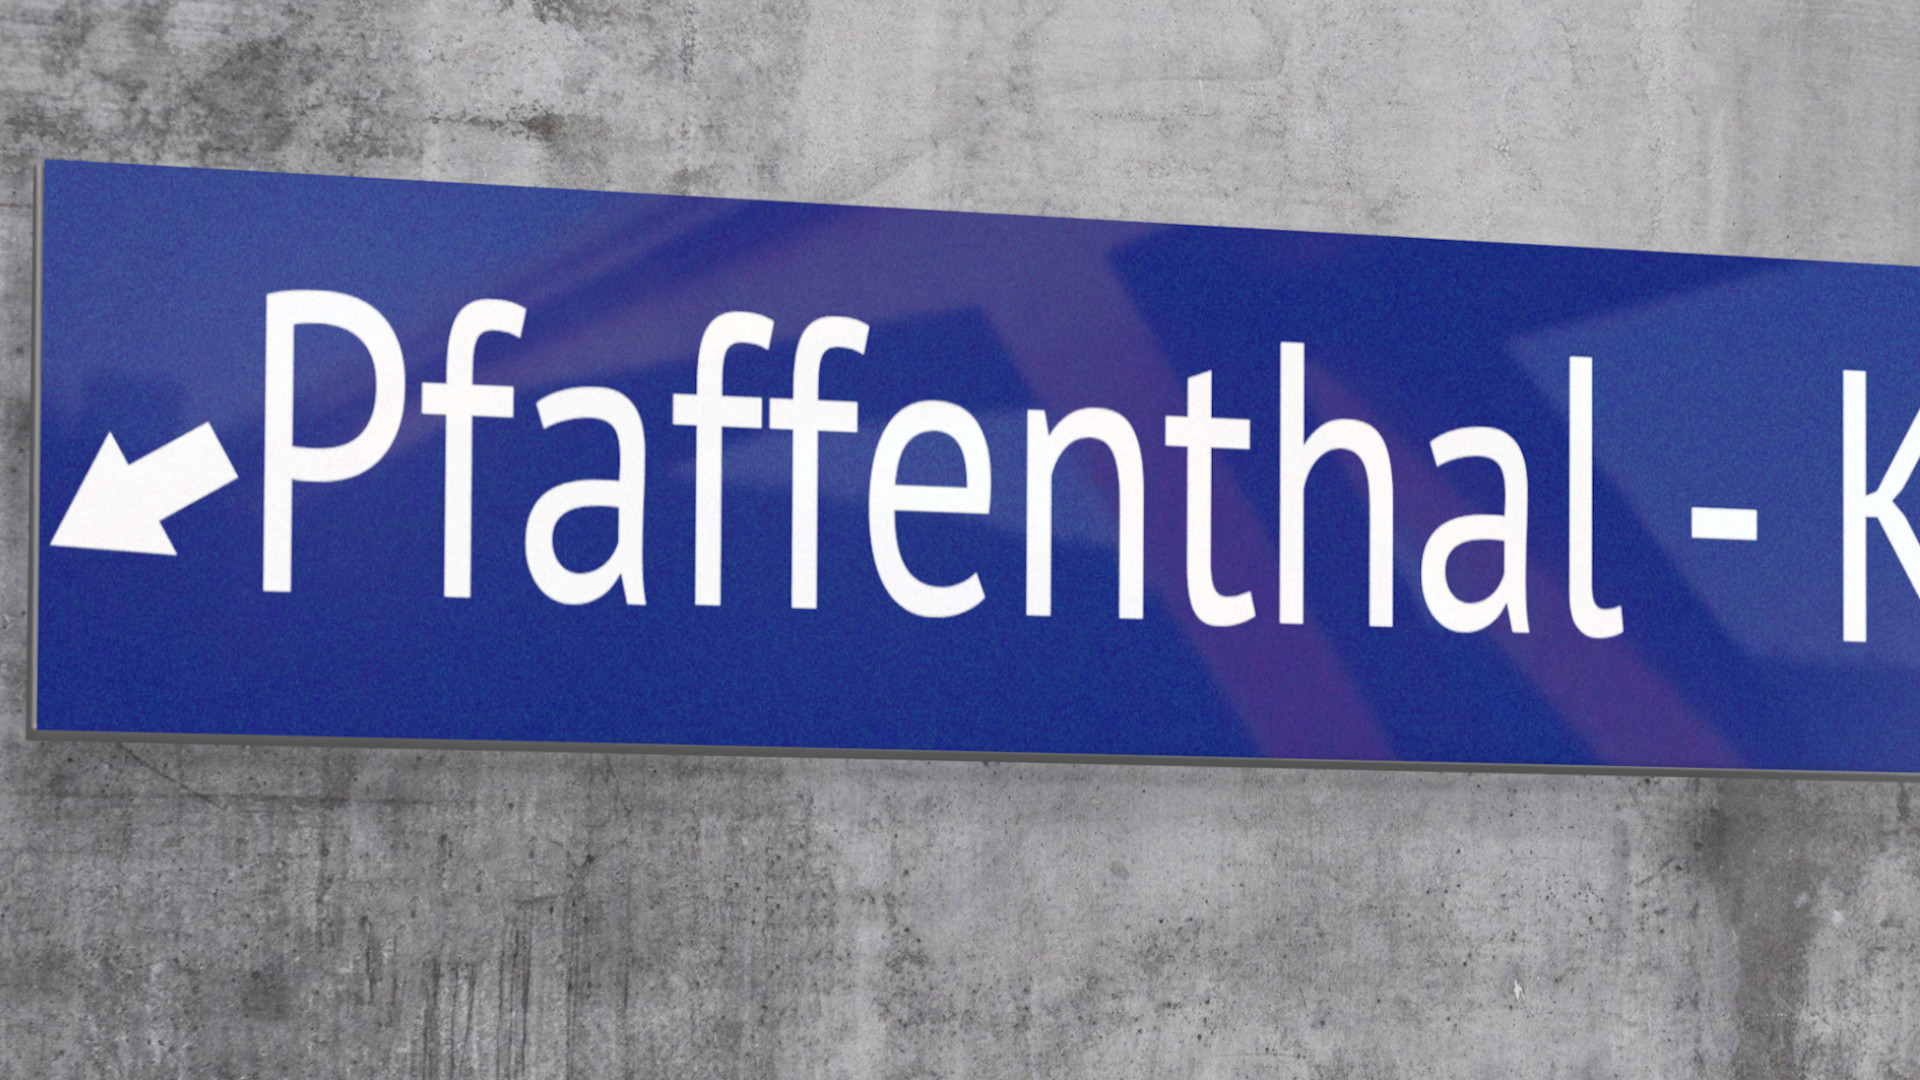 ‘Pfaffenthal’ name given three more Fs